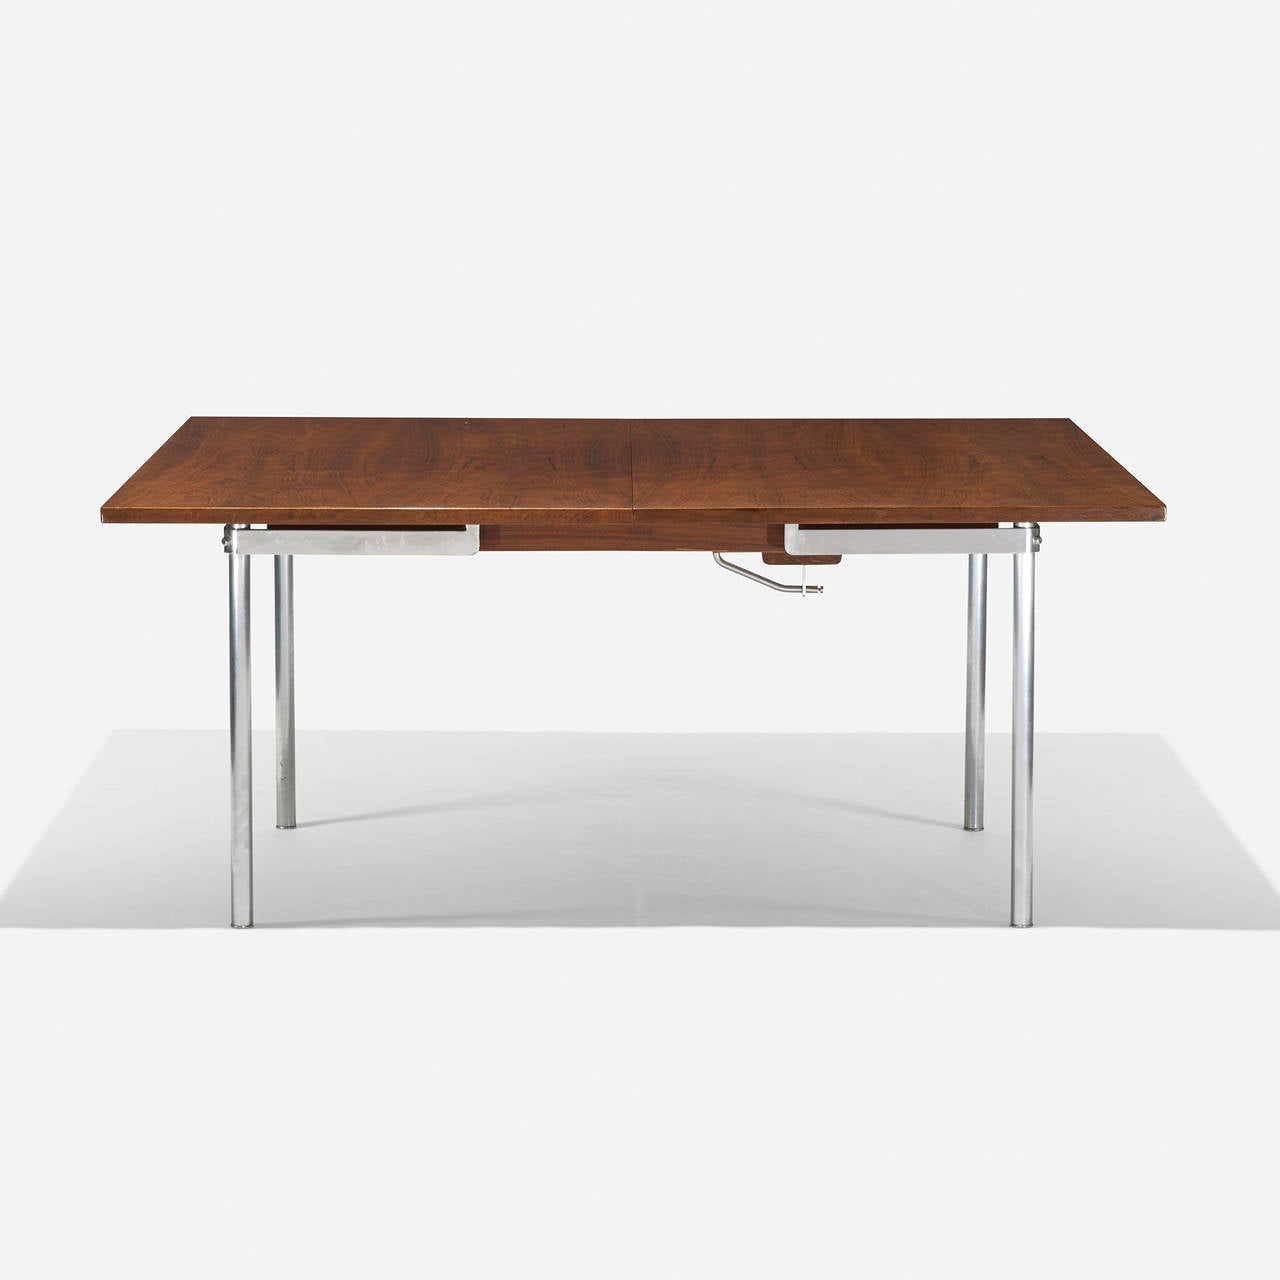 Plated Extension Dining Table, Model AT321 by Hans Wegner for Andreas Tuck